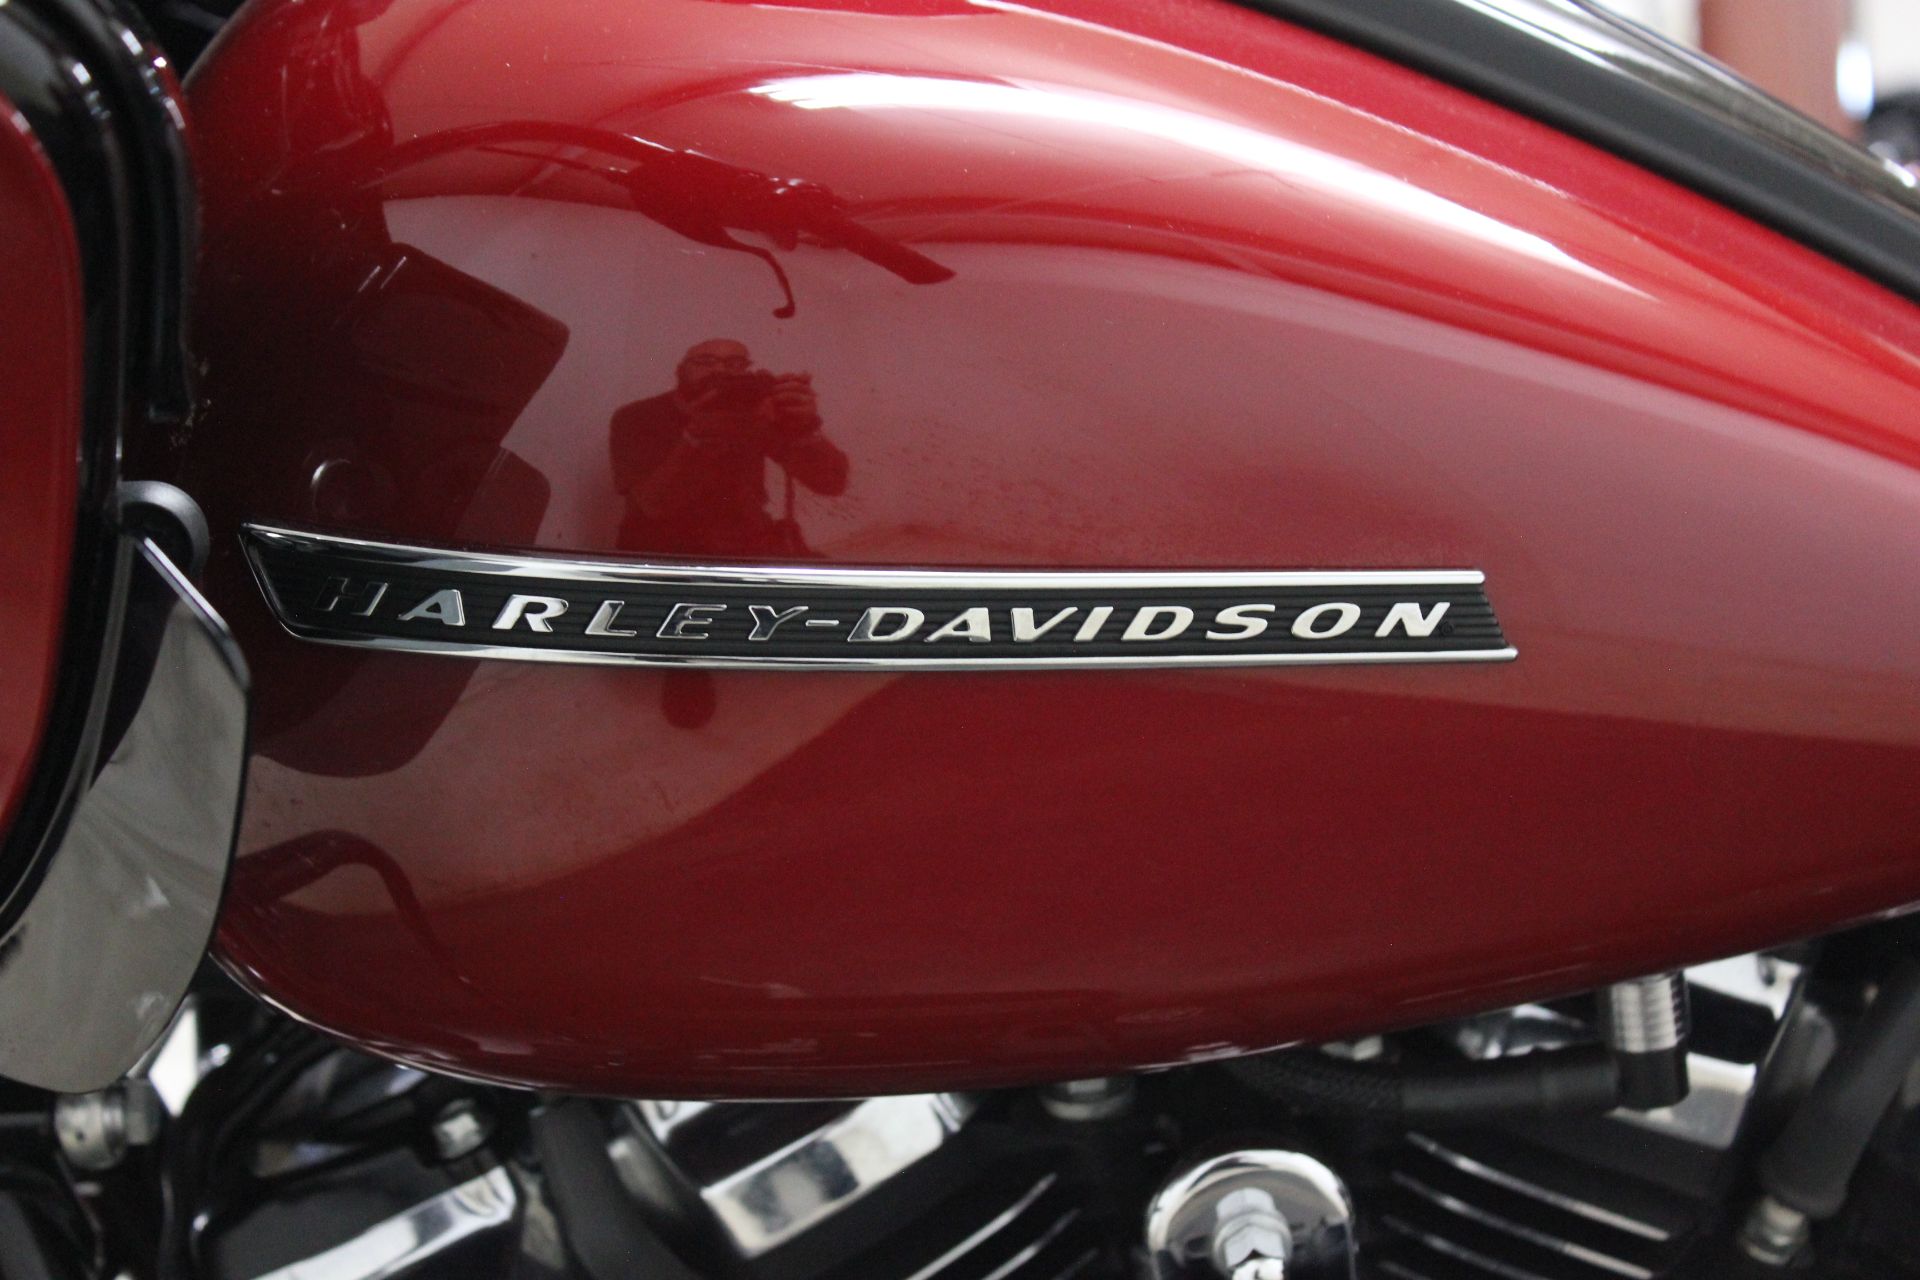 2020 Harley-Davidson ROAD GLIDE SPECIAL in Pittsfield, Massachusetts - Photo 20